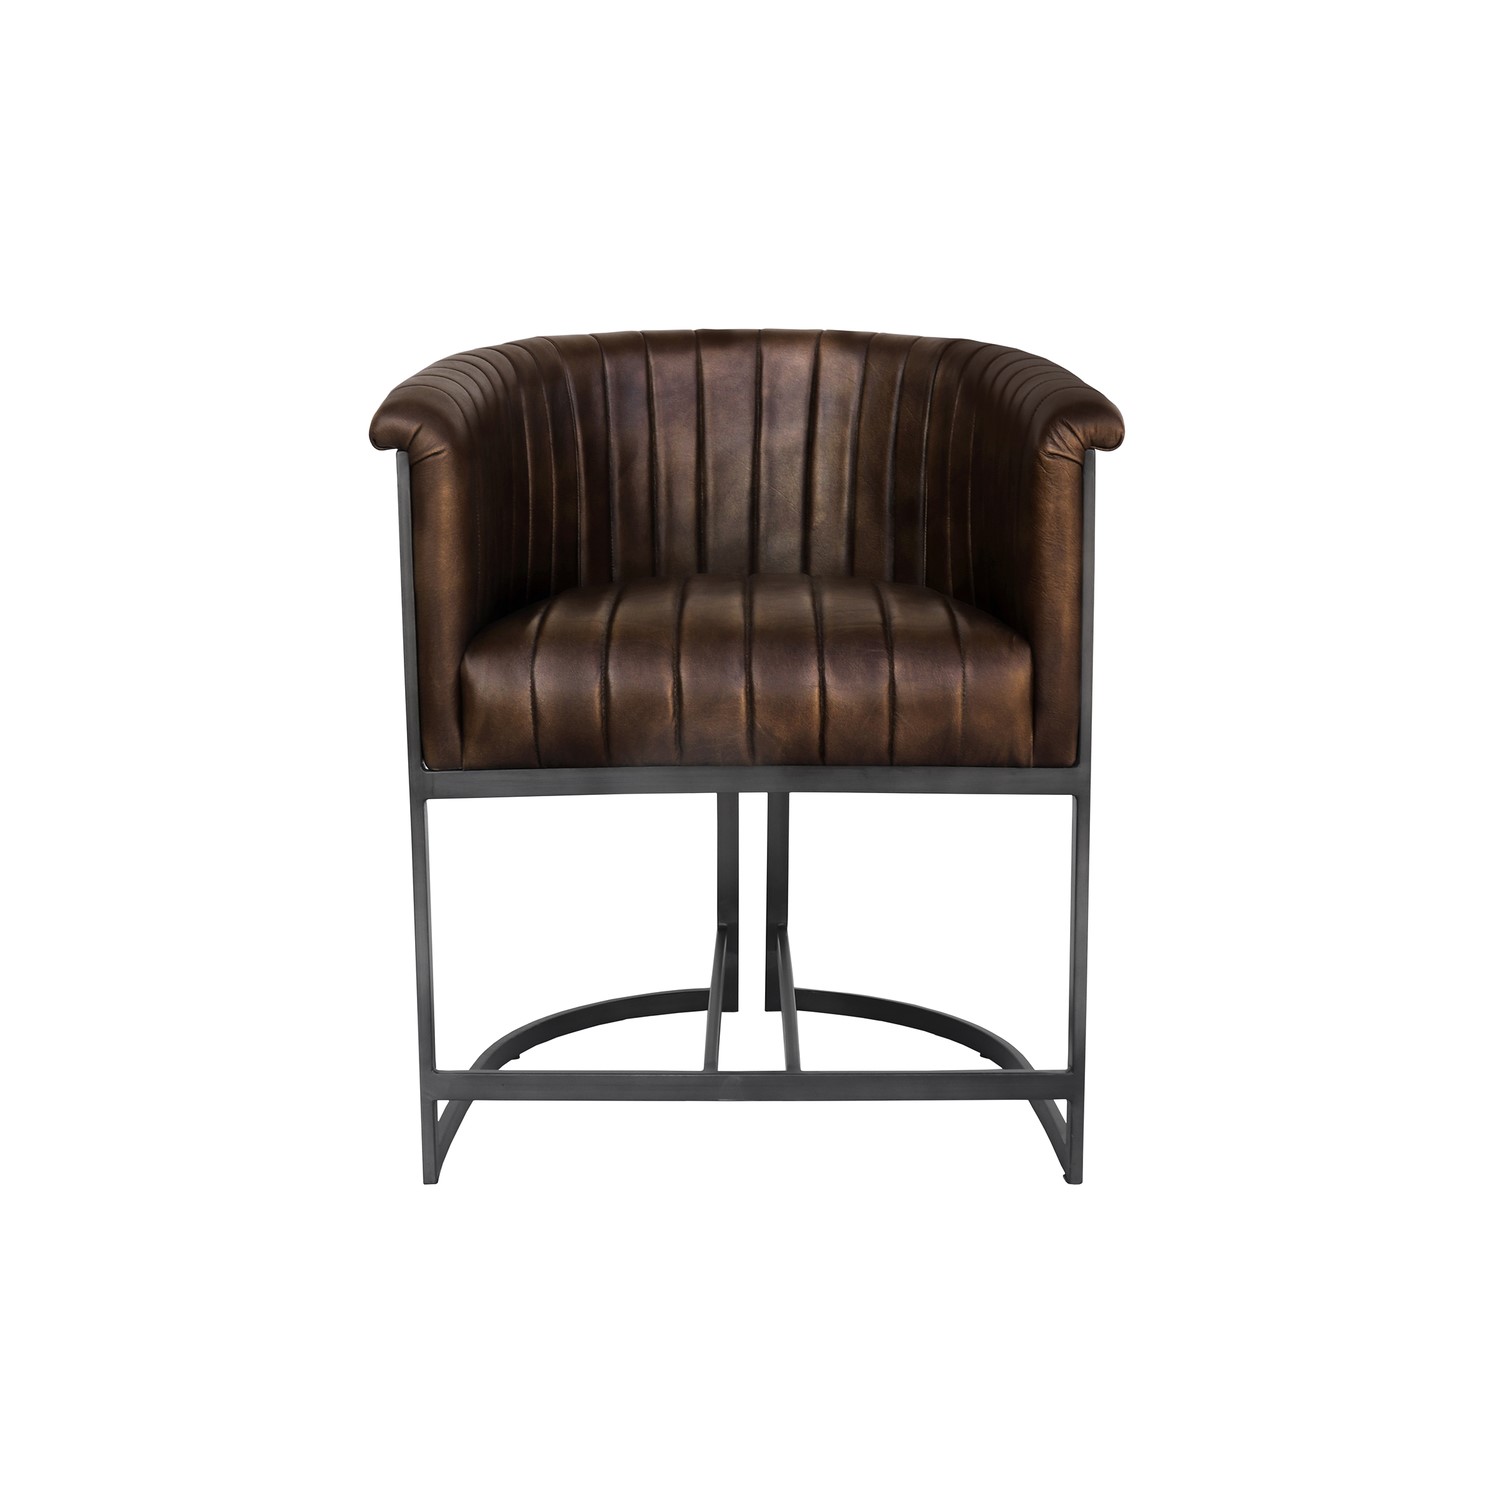 Read more about Real leather & iron classic tub dining chair brown